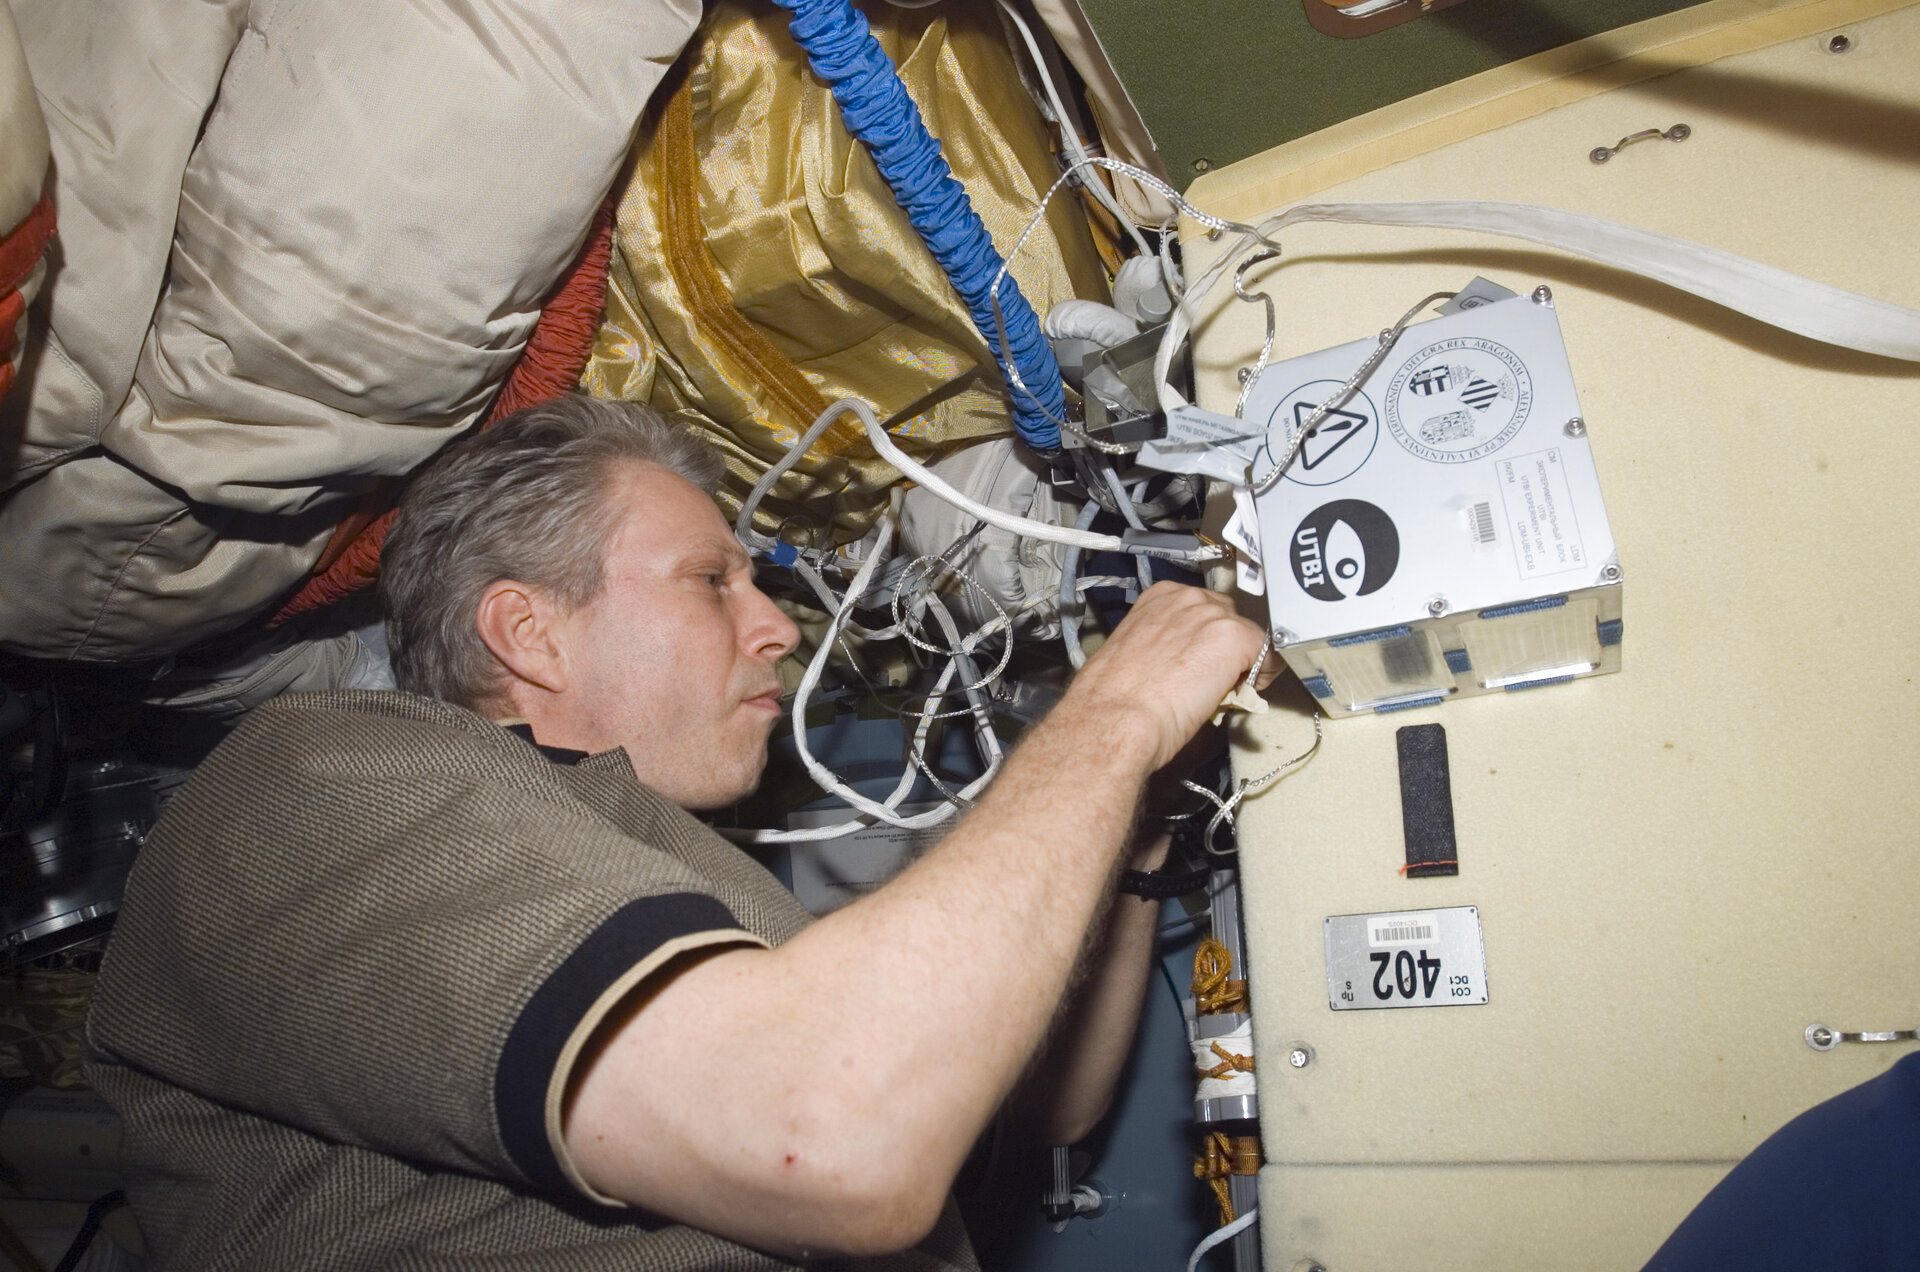 ESA astronaut Thomas Reiter working on UTBI, which flew on board the ISS in October 2006